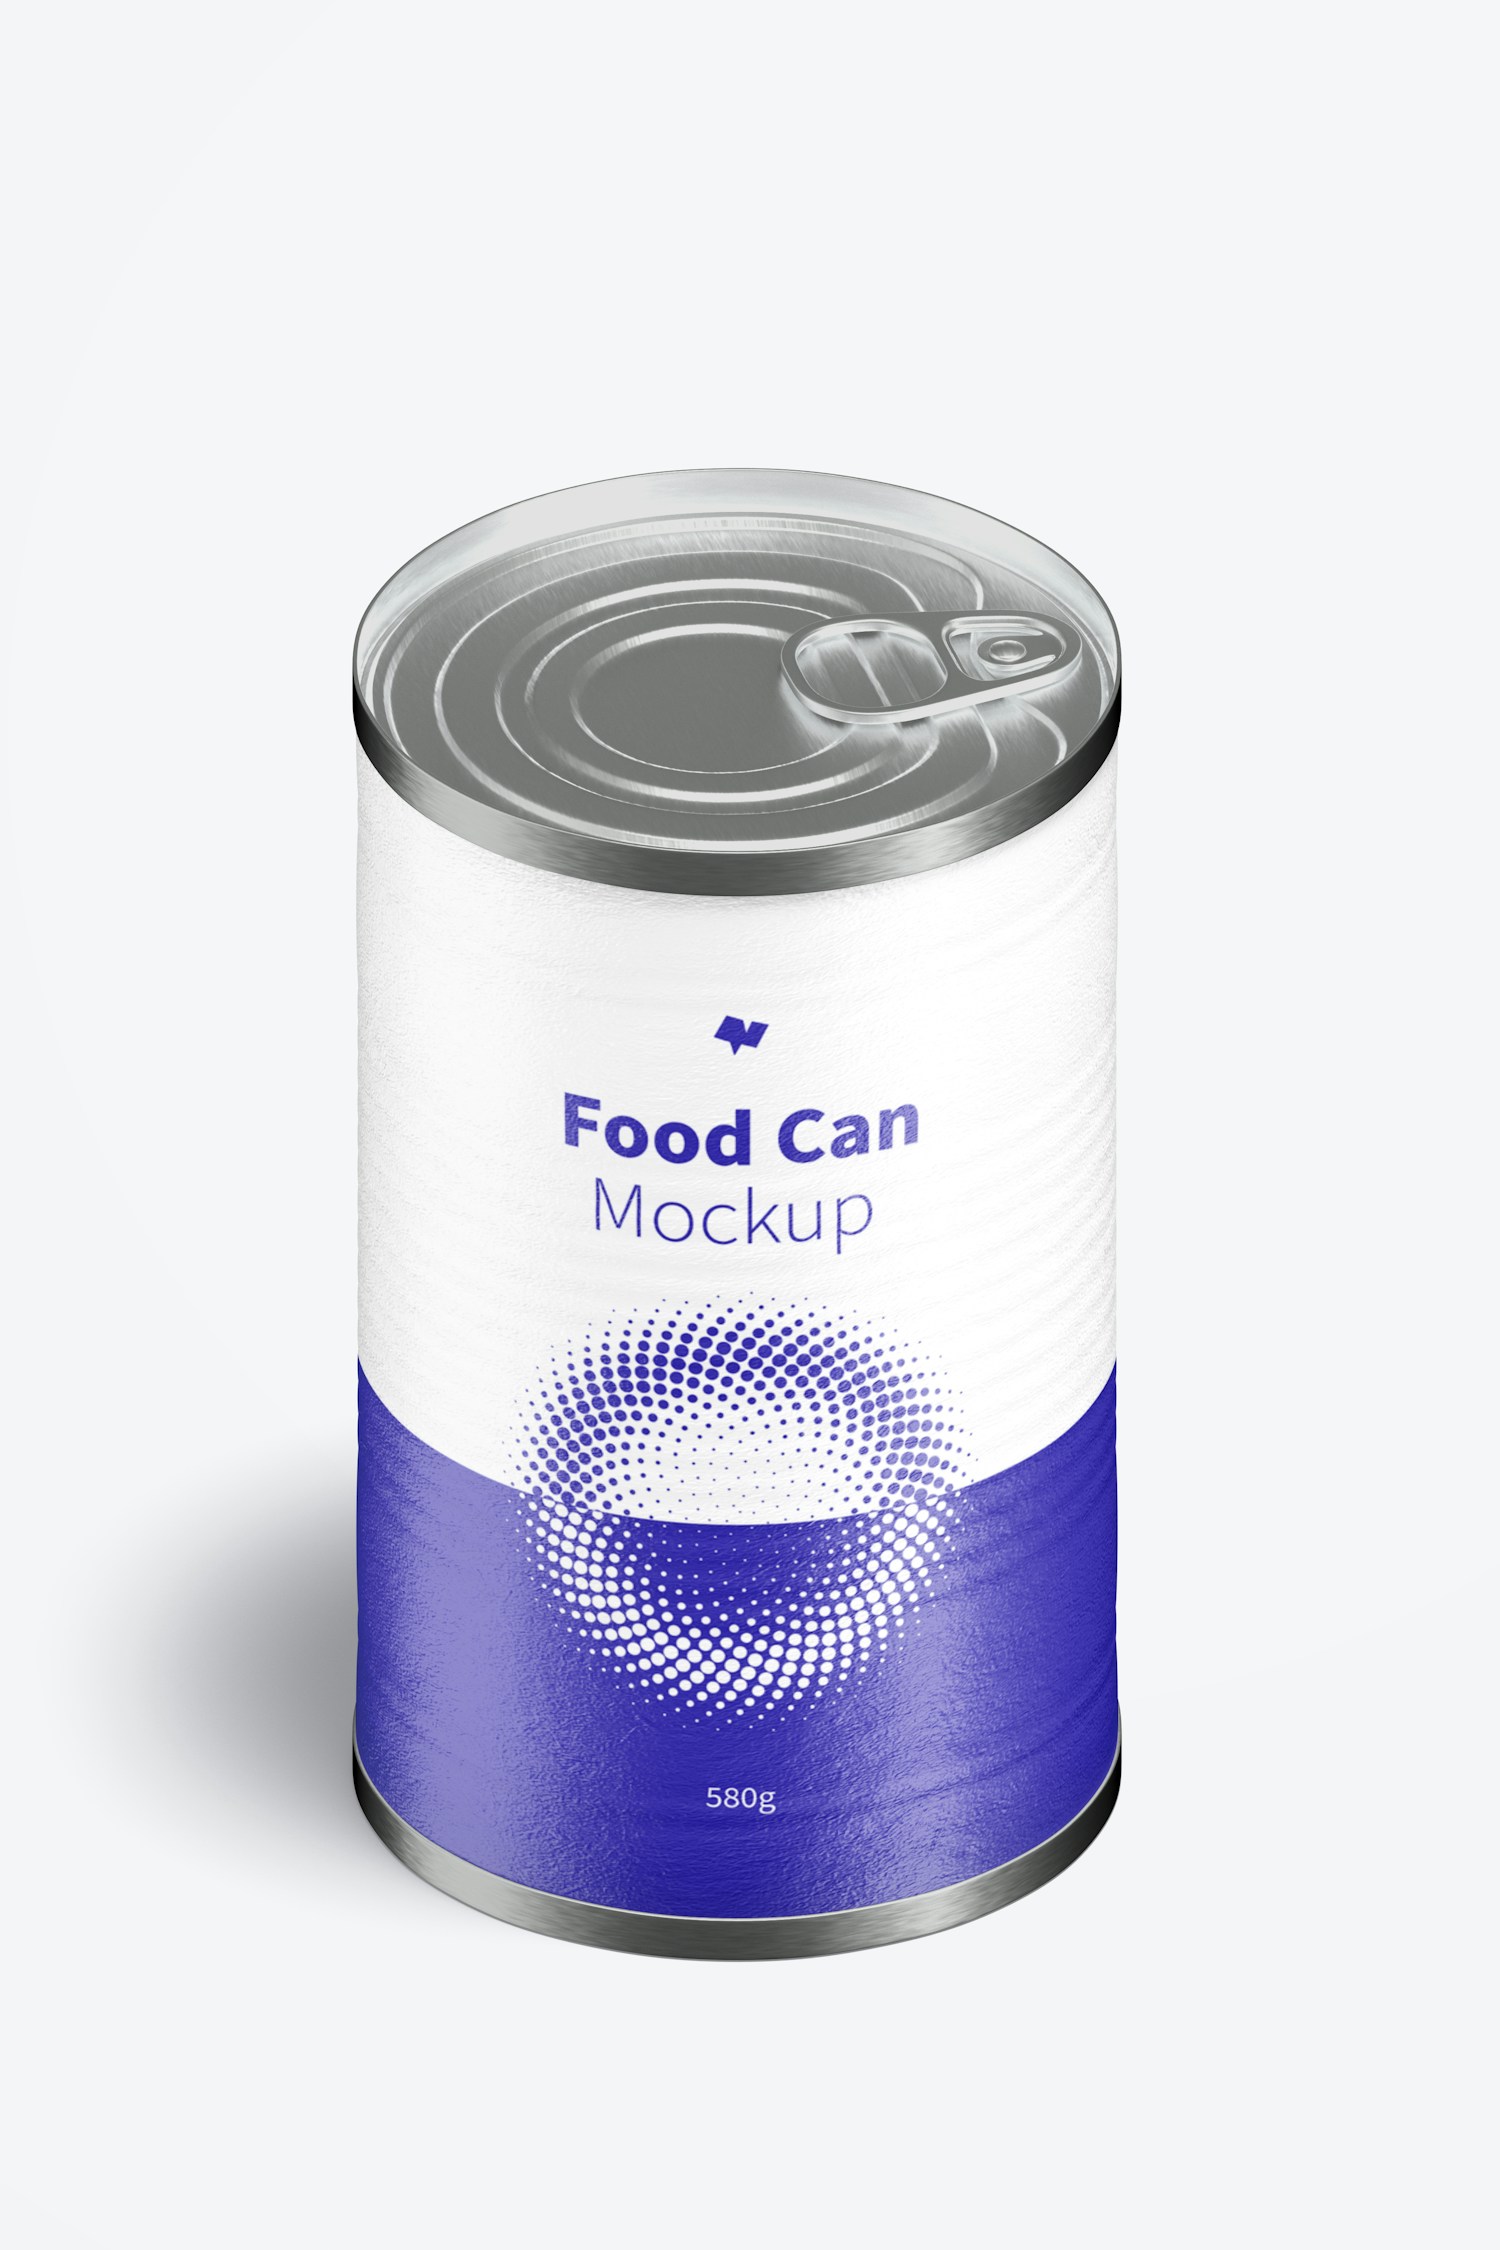 580g Food Can Mockup, Isometric View